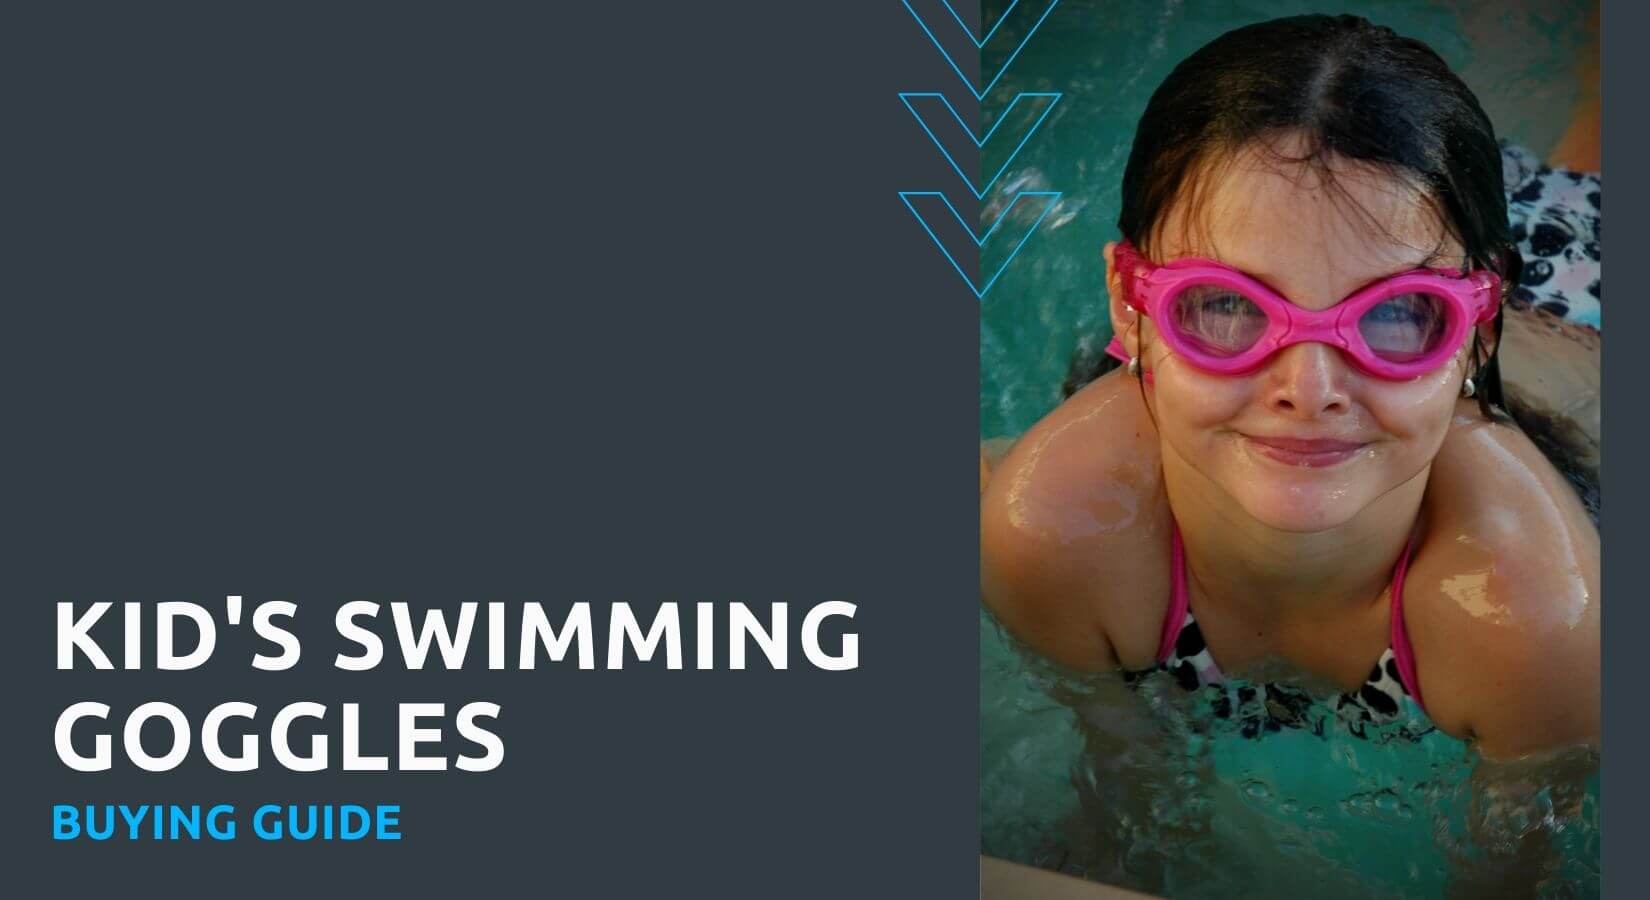 Kid's Swimming Goggles Buying Guide